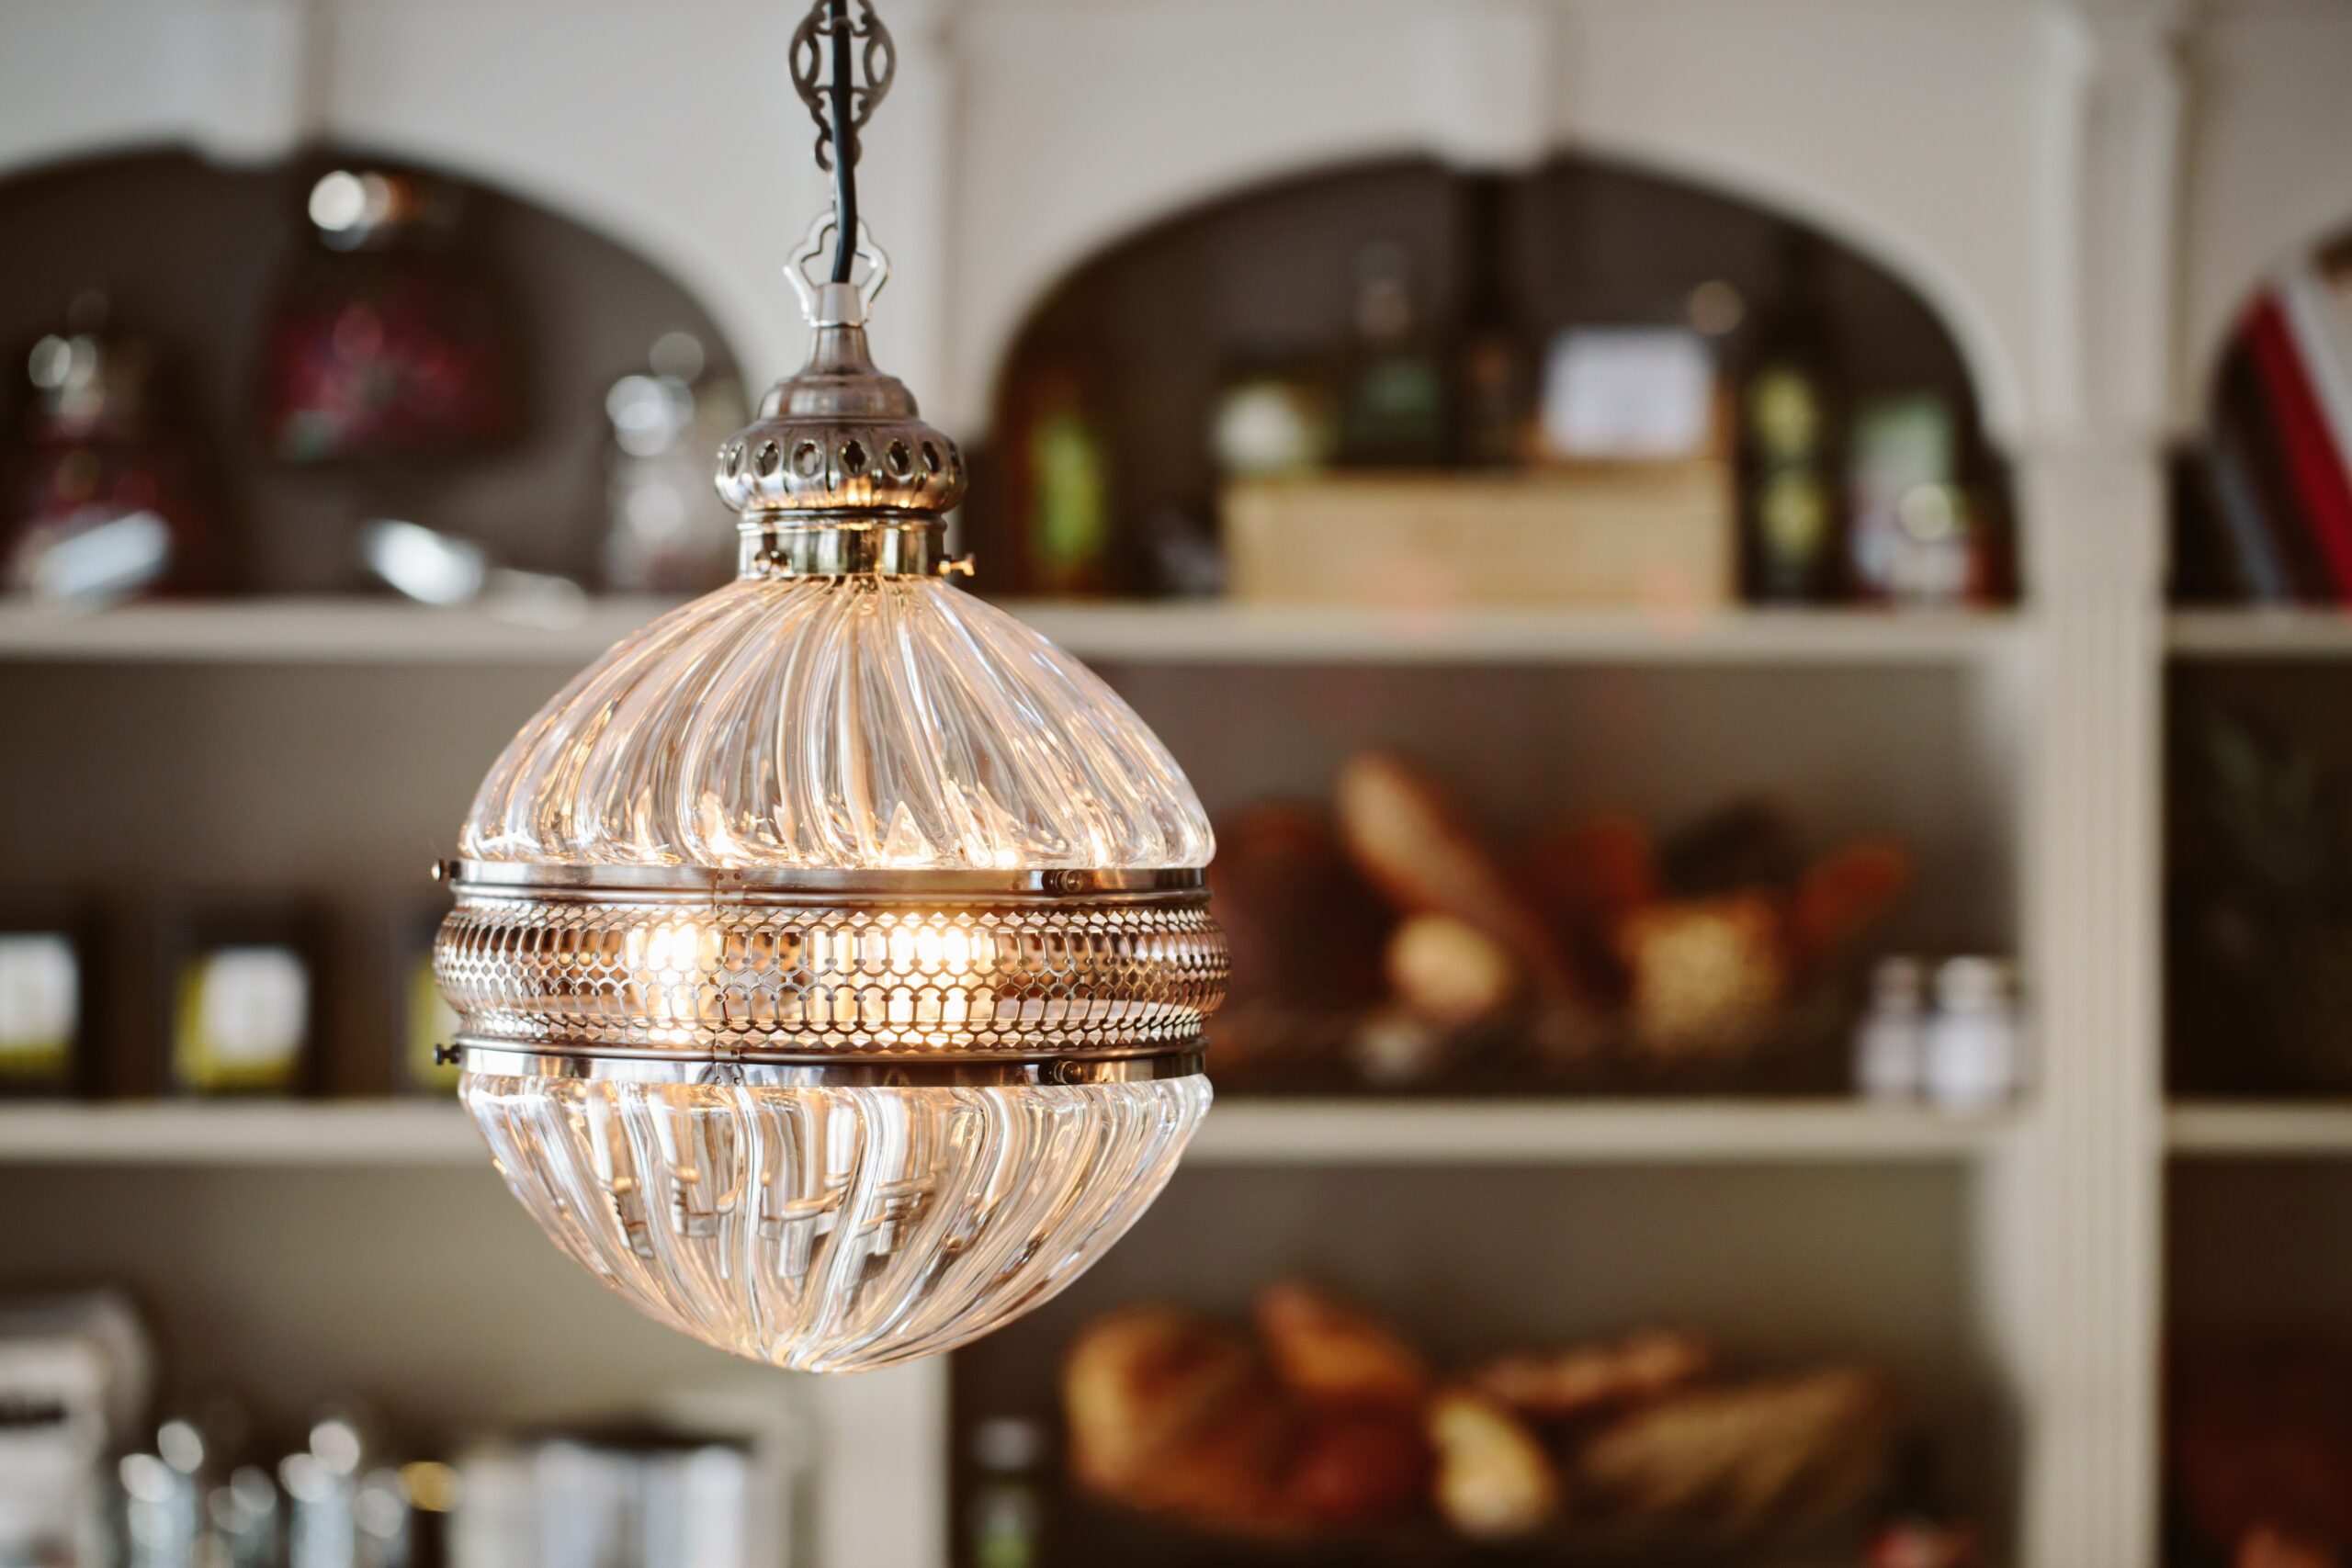 Restaurant Interior Design and Lighting, chandelier and shelving with food and small objects